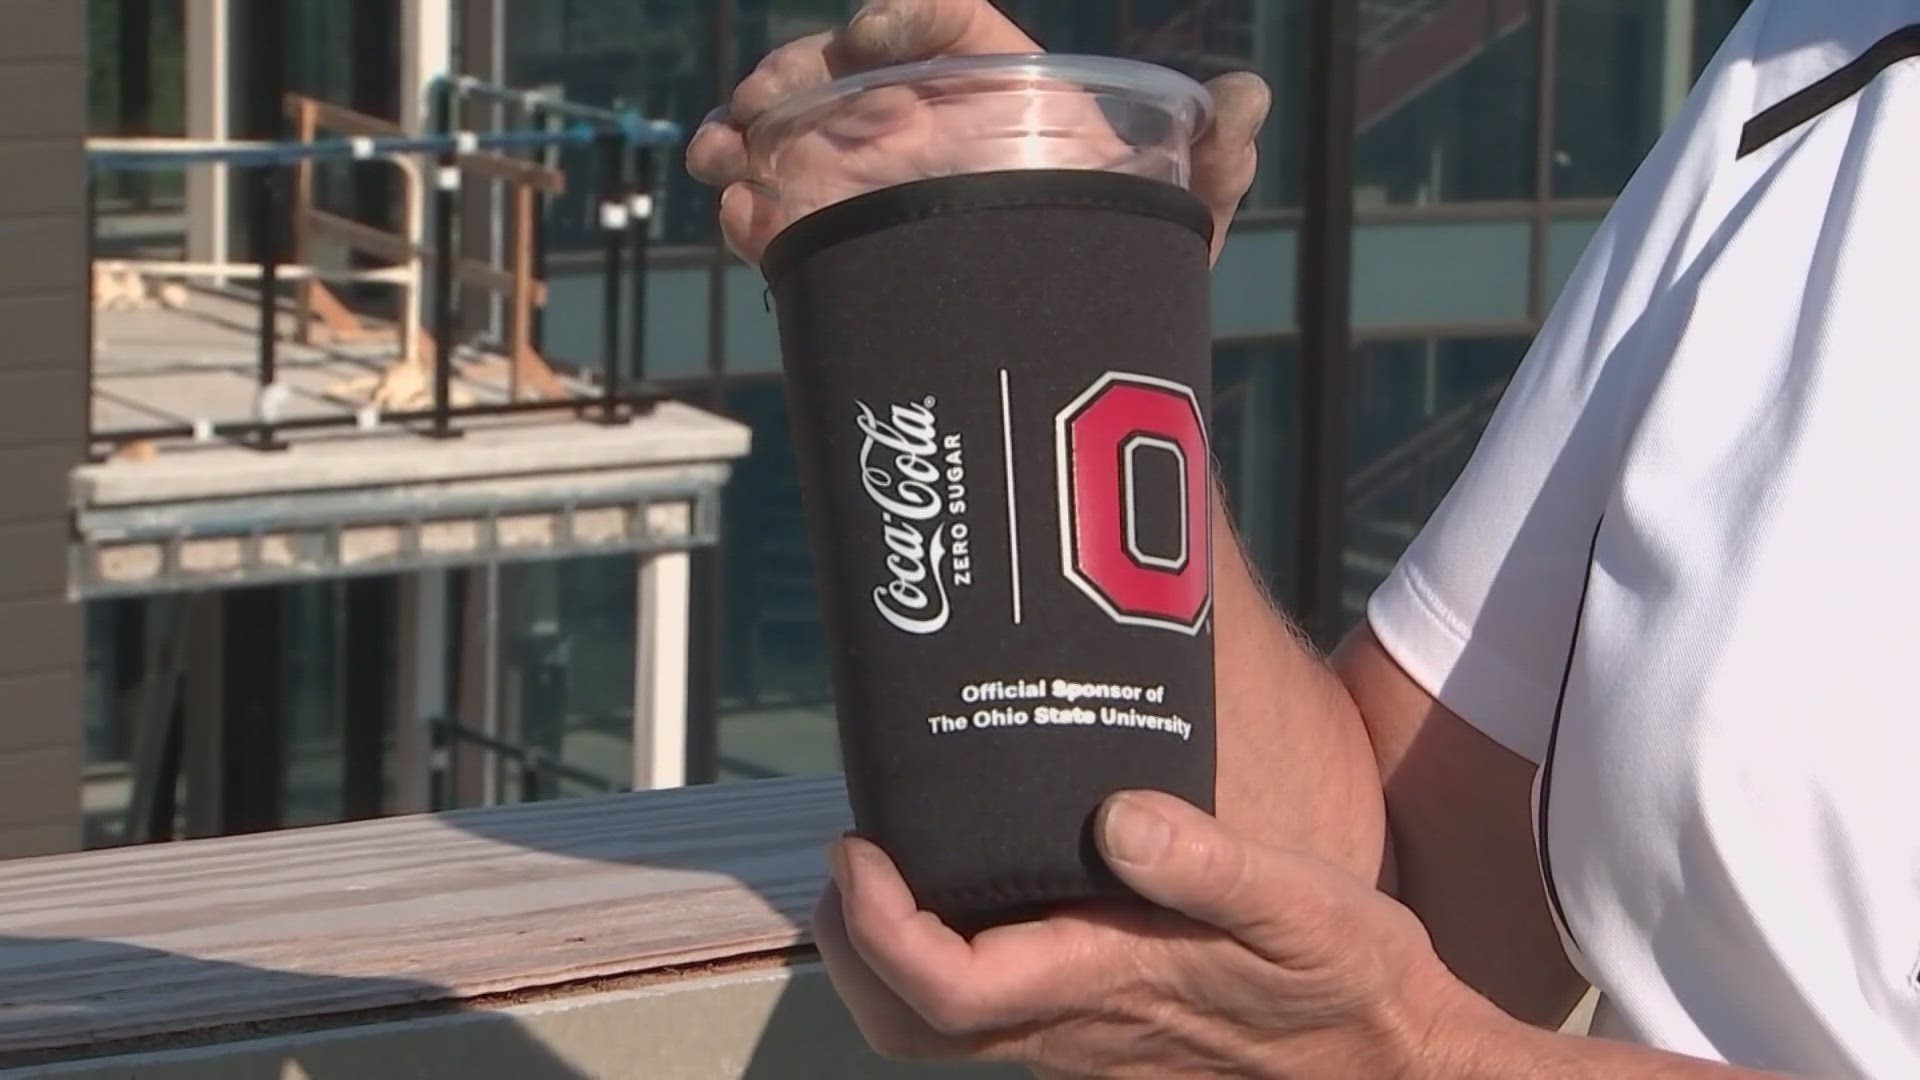 McDonald's is selling a drink sleeve in partnership with Ohio State. The money raised will help support the Ronald McDonald House Charities of Central Ohio.